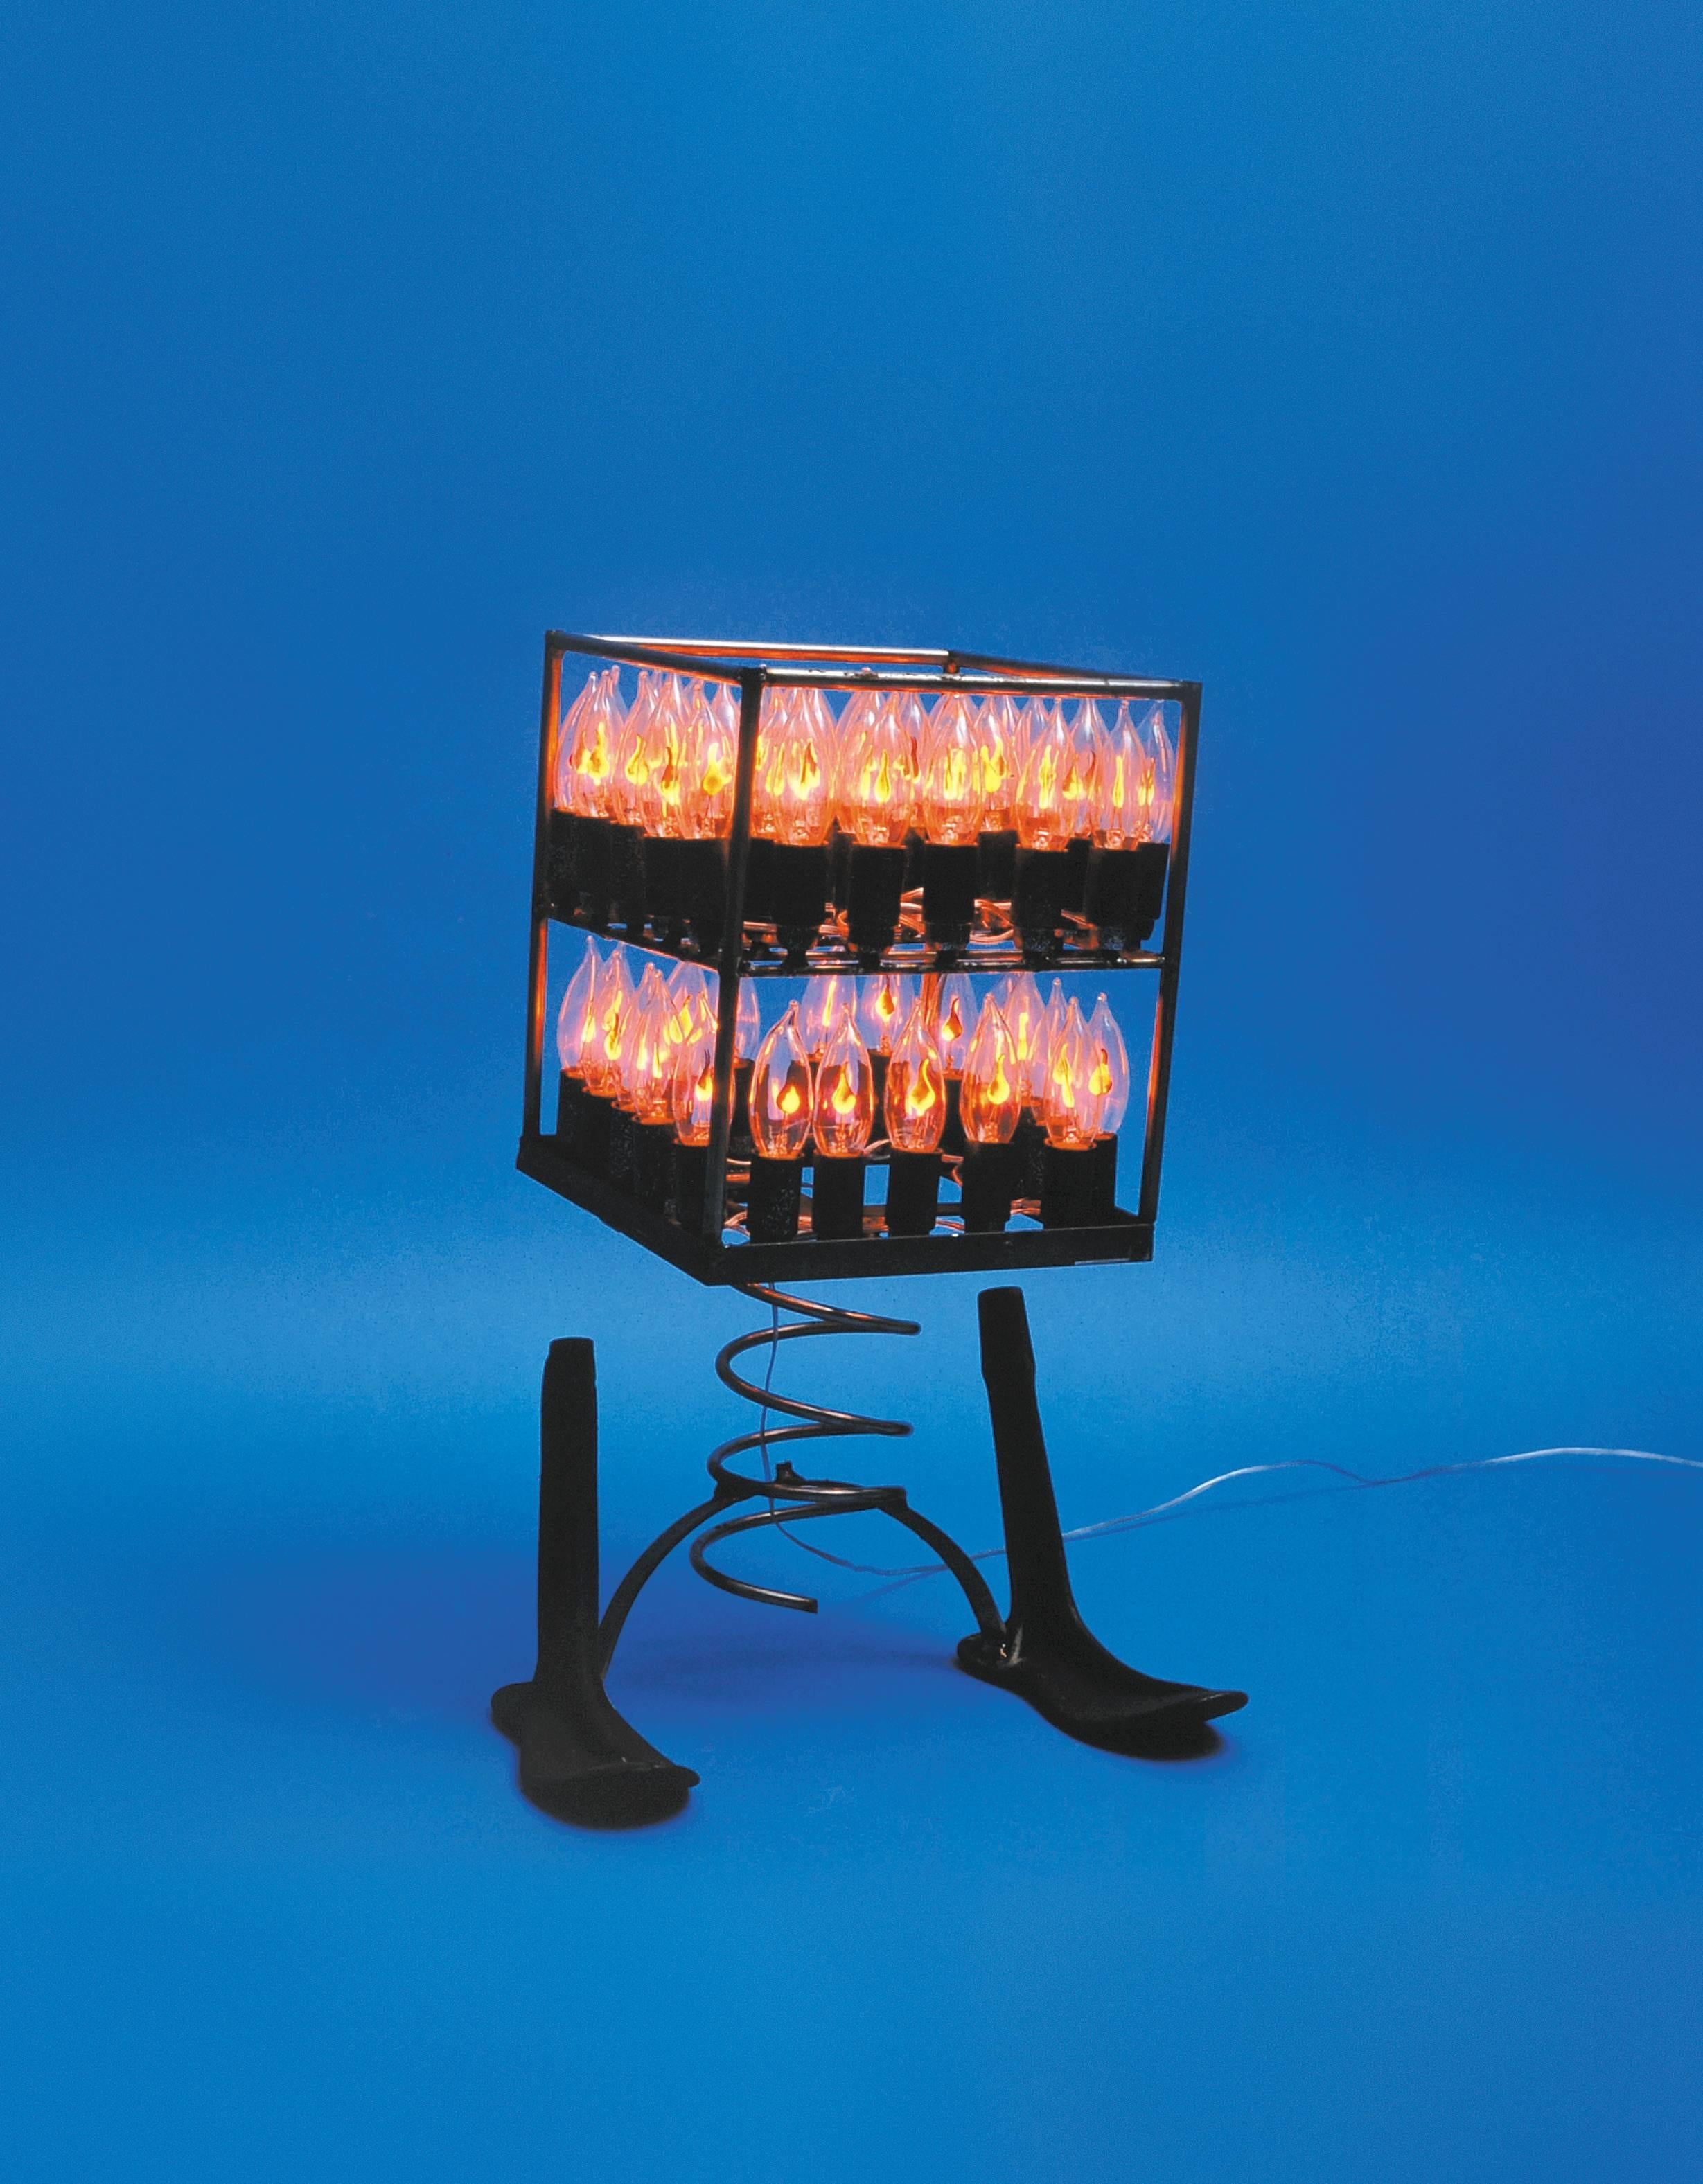 Italian, b. 1955, Bari, Italy.
Artist and filmmaker he lives and works in Rome. In the mid-nineties, he produced his first objects “flaming” made up of hundreds of flame bulbs that simulate the light of votive candles. Over the years he became a